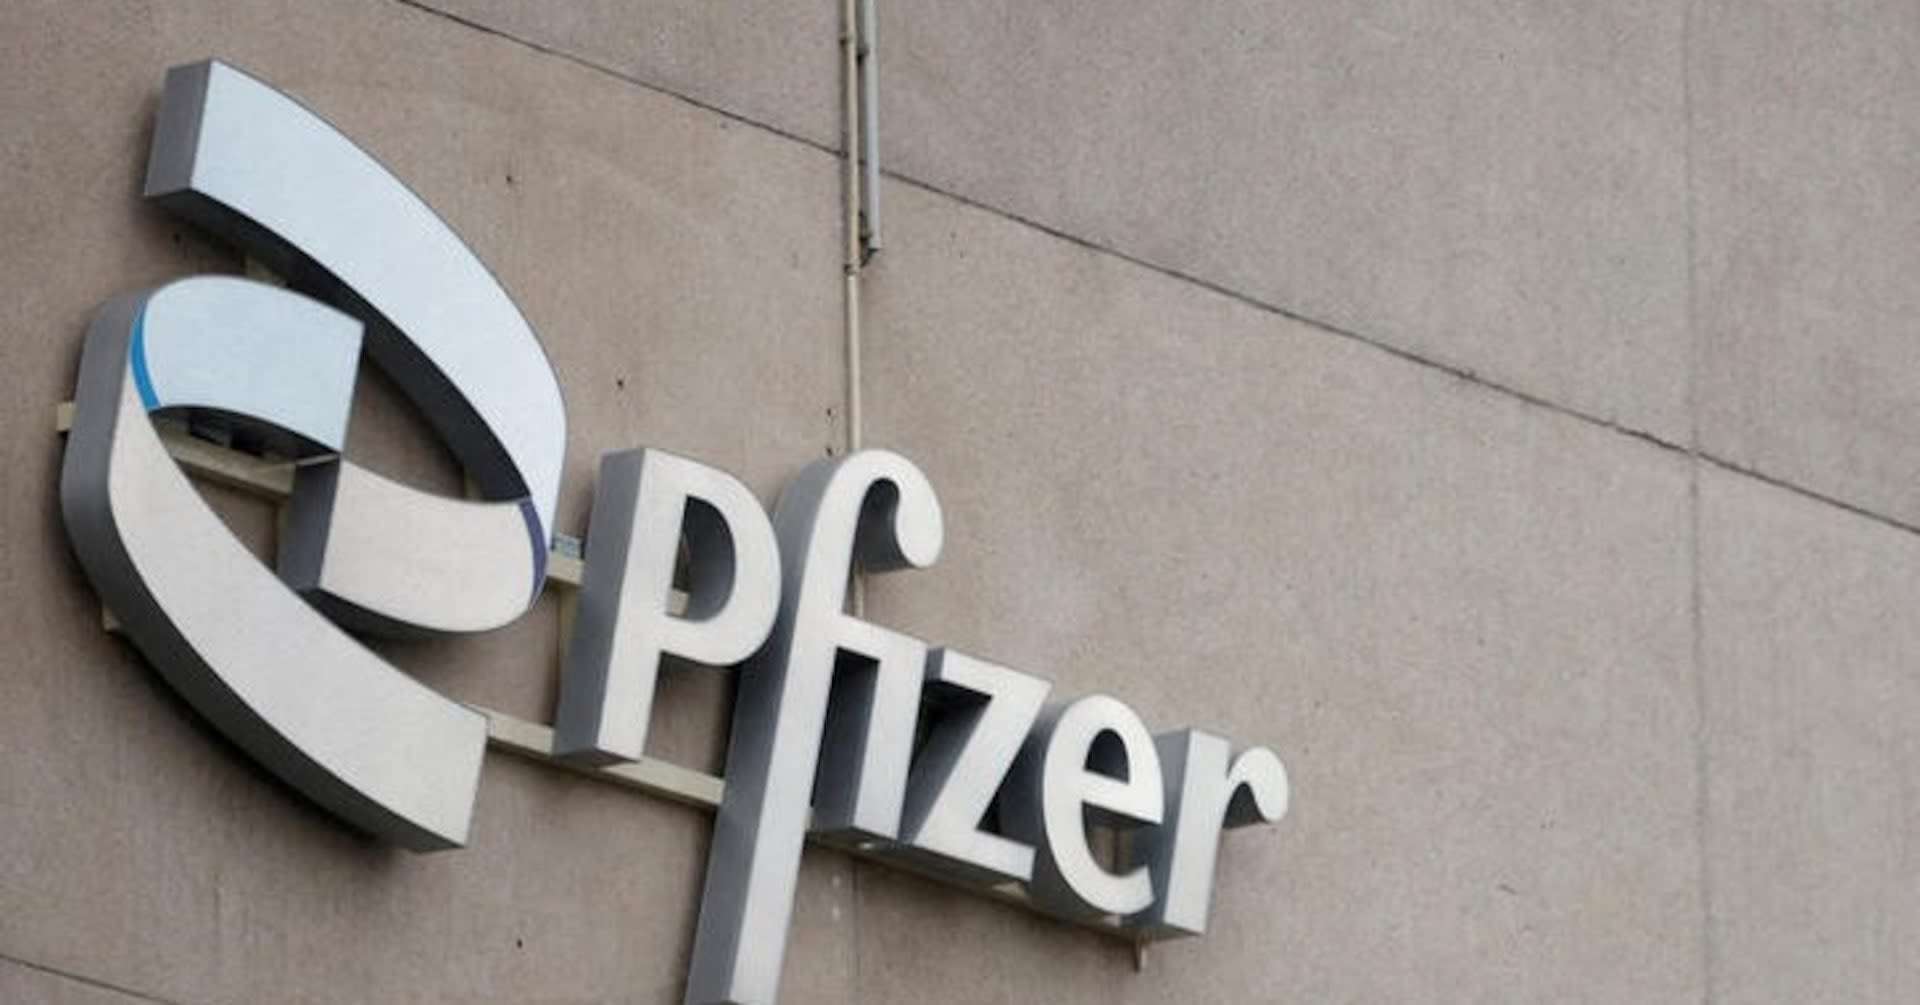 Pfizer wants the $75 mln left from SAC Capital’s insider trading settlement with SEC